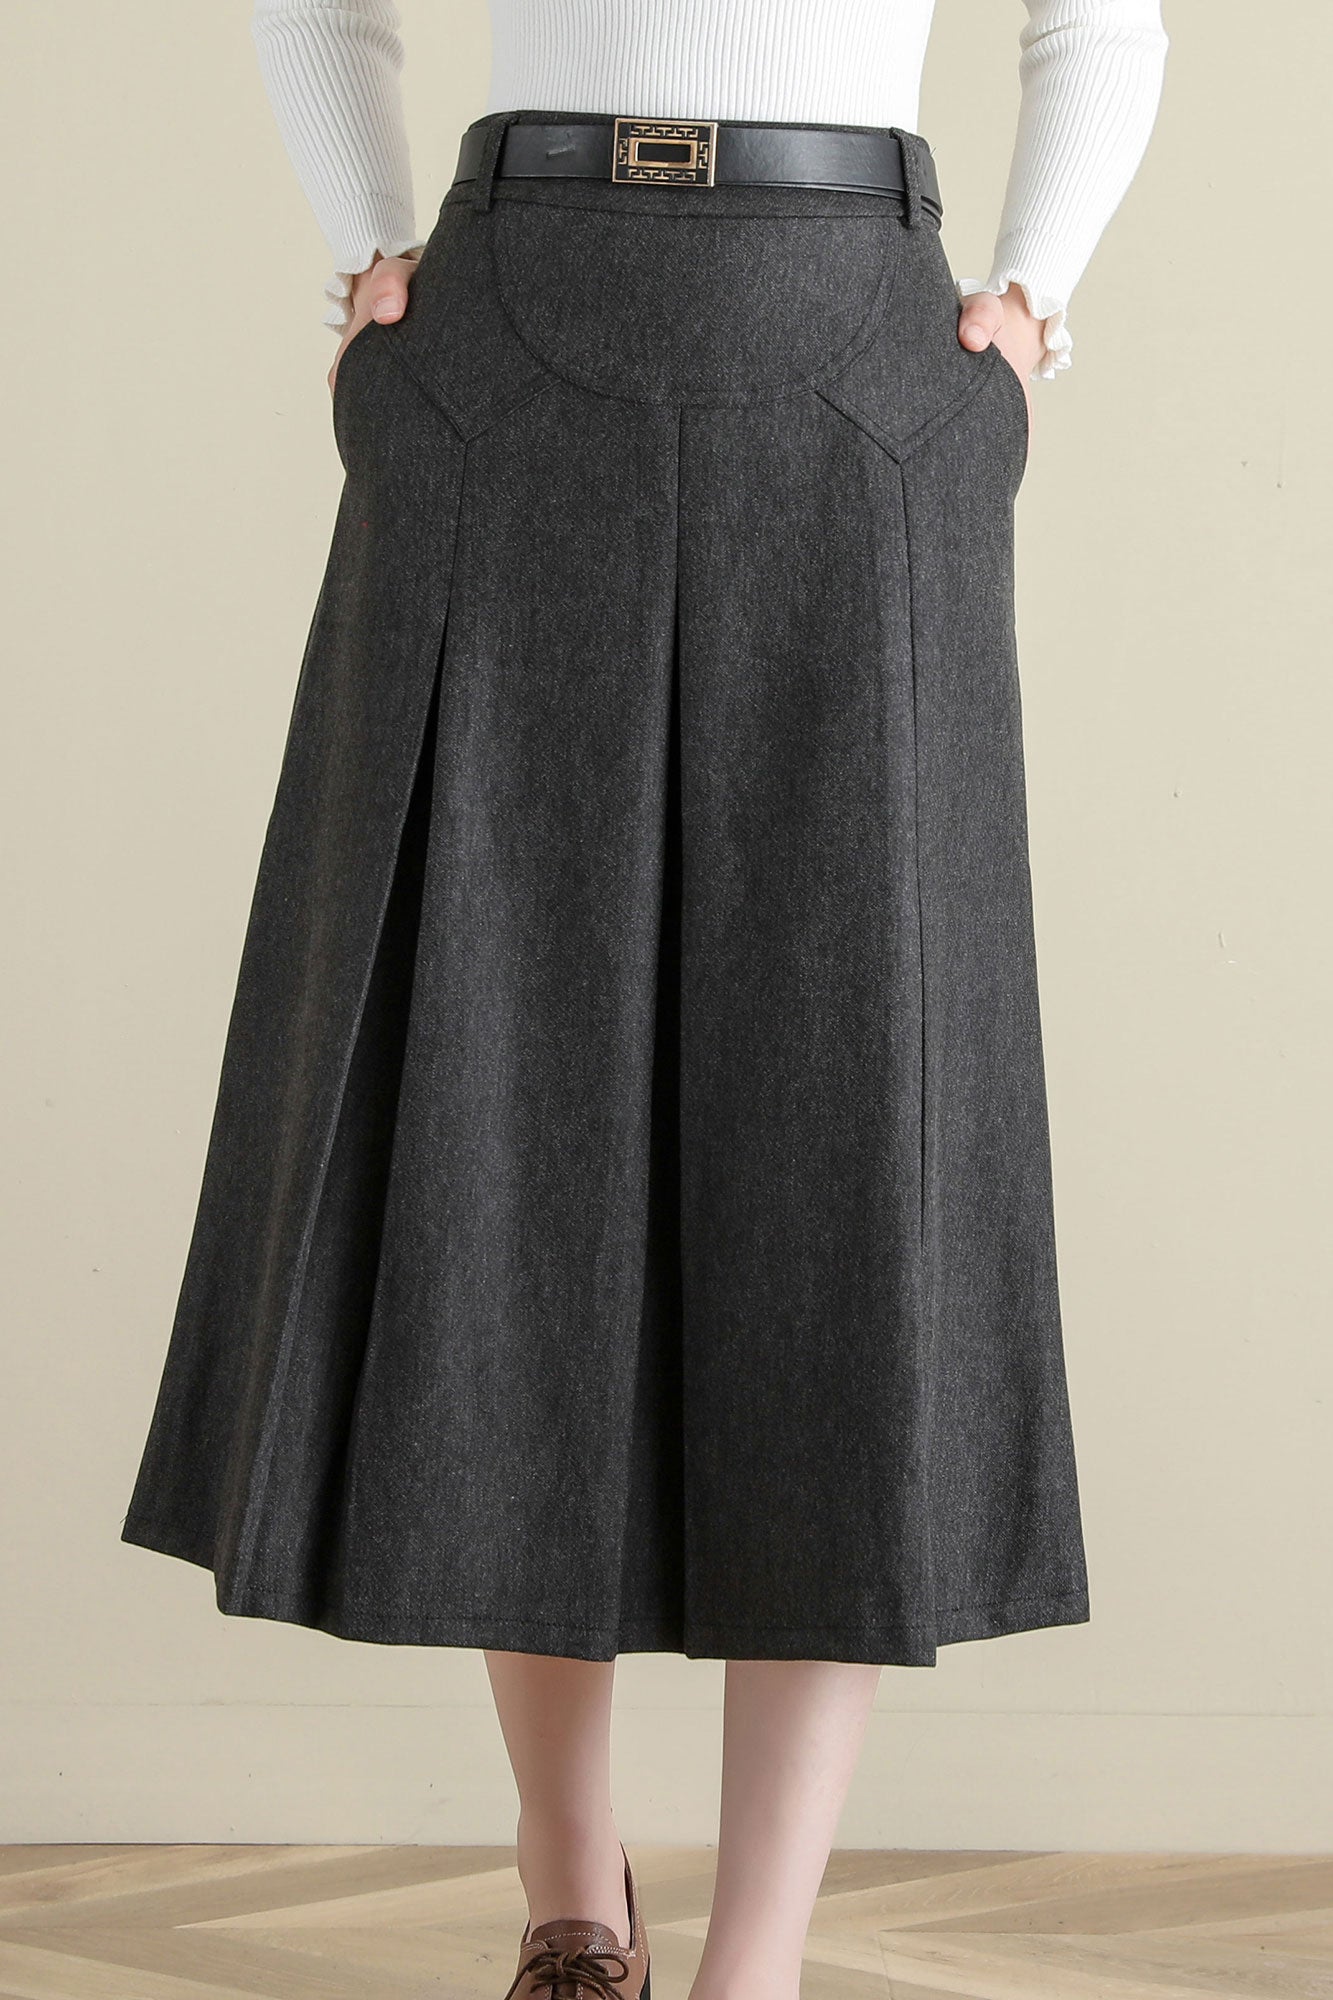 Grey Pleated Midi Wool Skirt Women, A Line Skirt with Pockets, Solid Skirt C251401